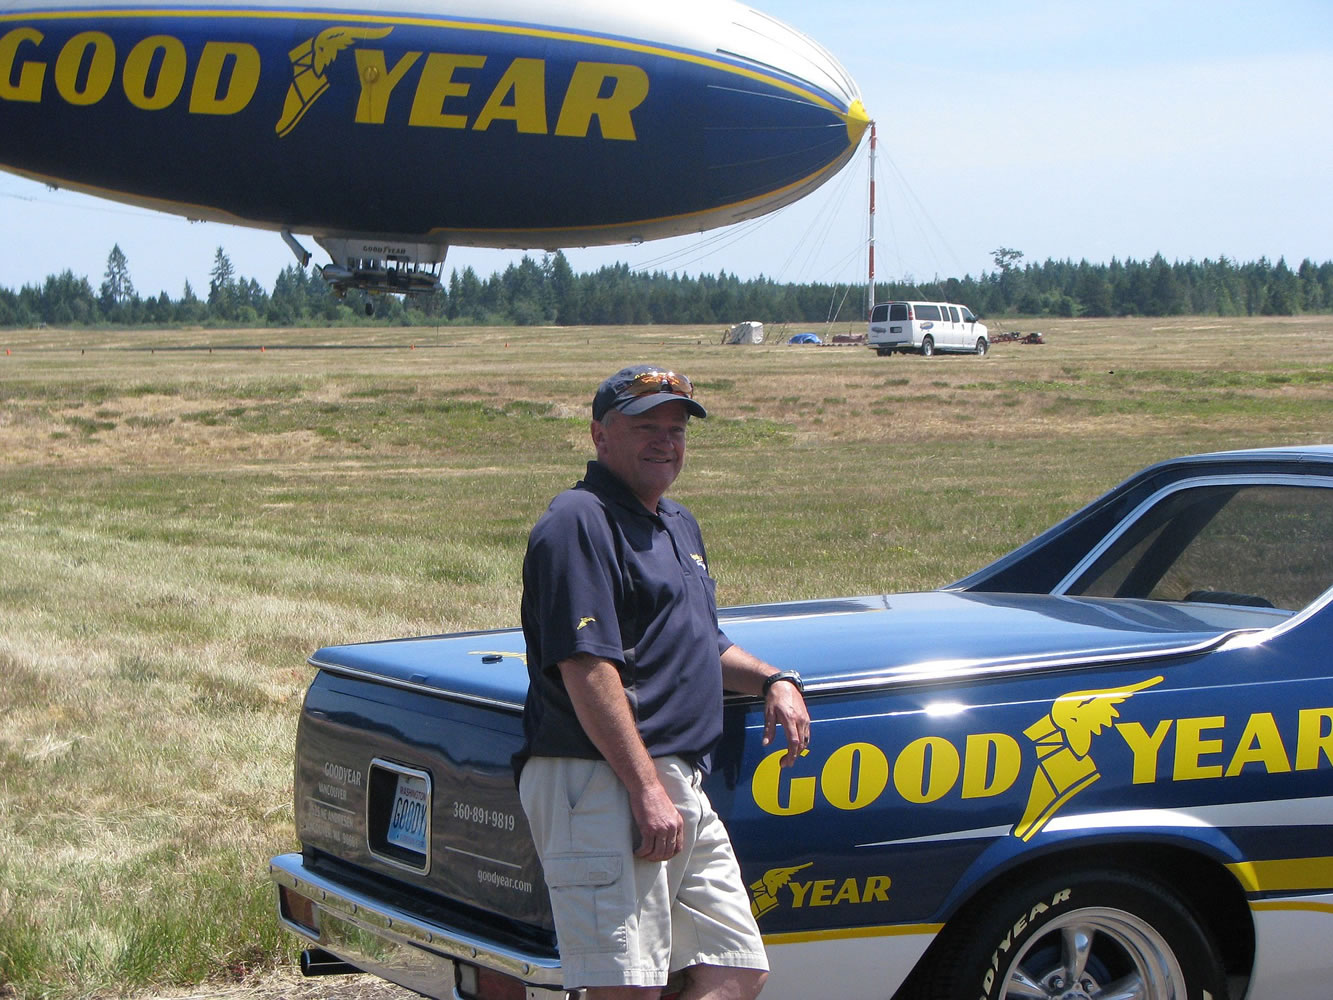 Vancouver Tire owner Gordon Bozarth with his Goodyear-inspired Chevrolet El Camino in Shelton on June 16, when he got to ride the blimp with his grandson, Carter Ziemer.